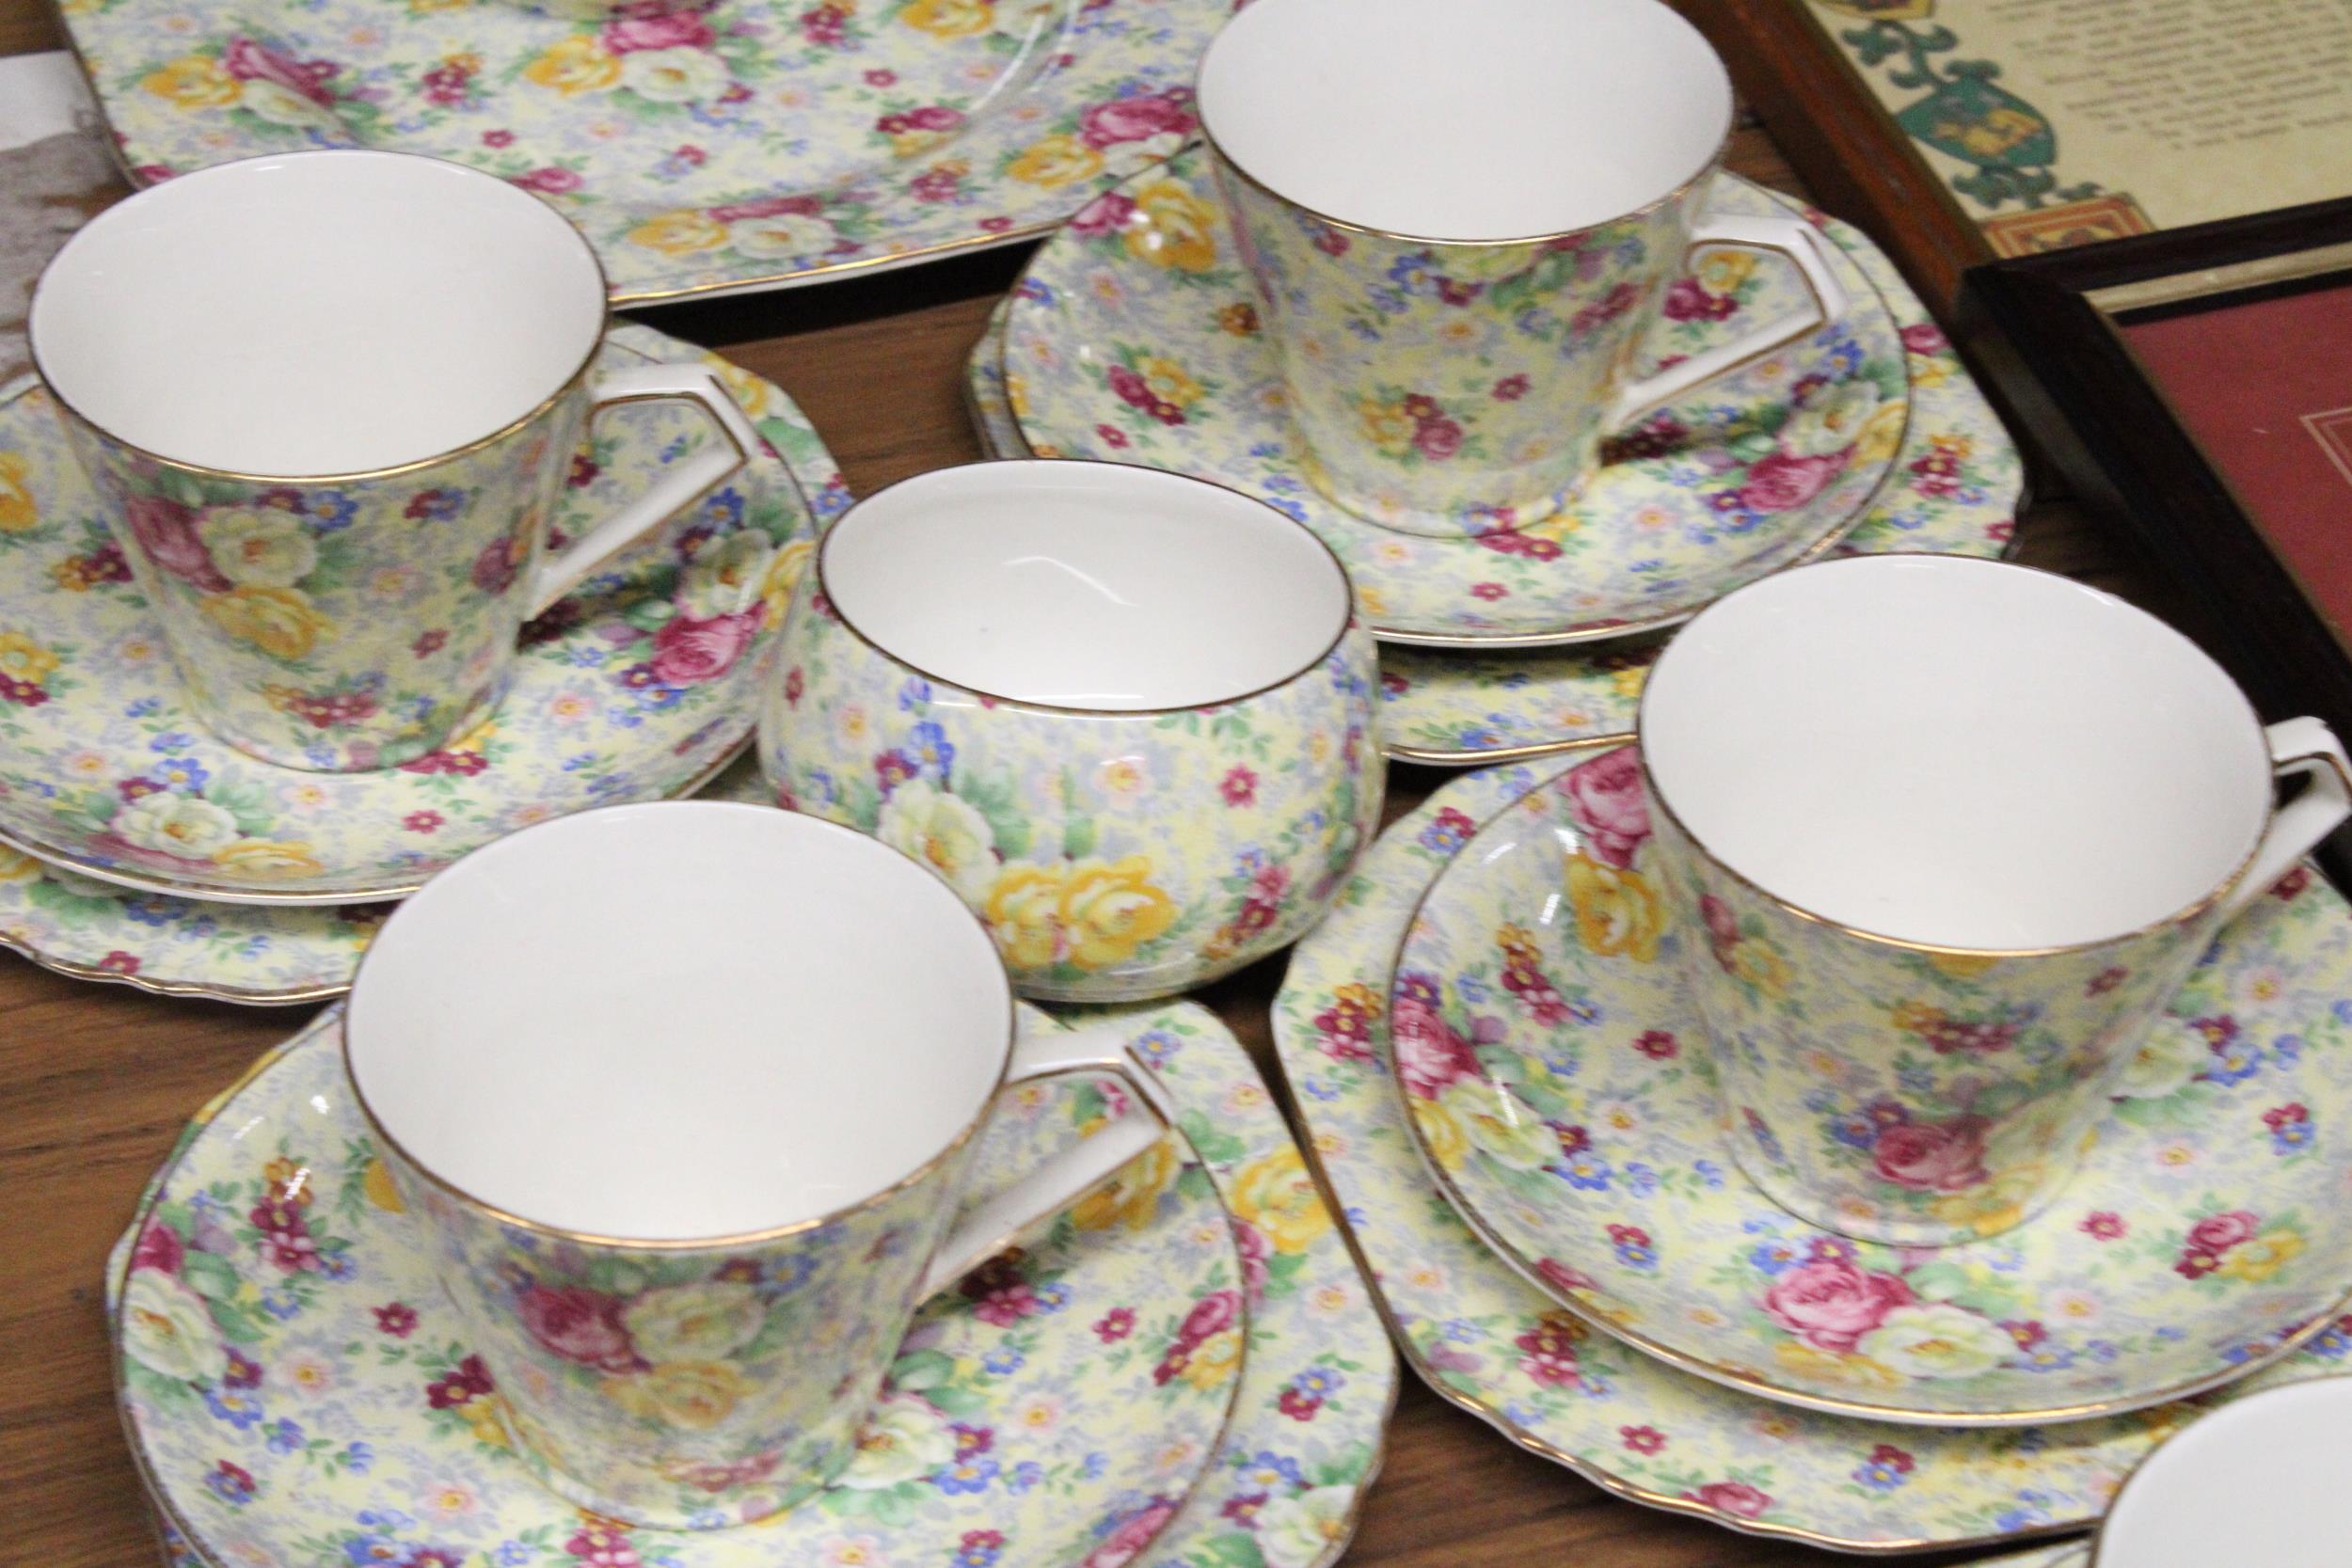 A LORD NELSON CHINTZ TEASET TO INCLUDE A CAKE PLATE, CREAM JUG, SUGAR BOWL, CUPS, SAUCERS AND SIDE - Image 4 of 5